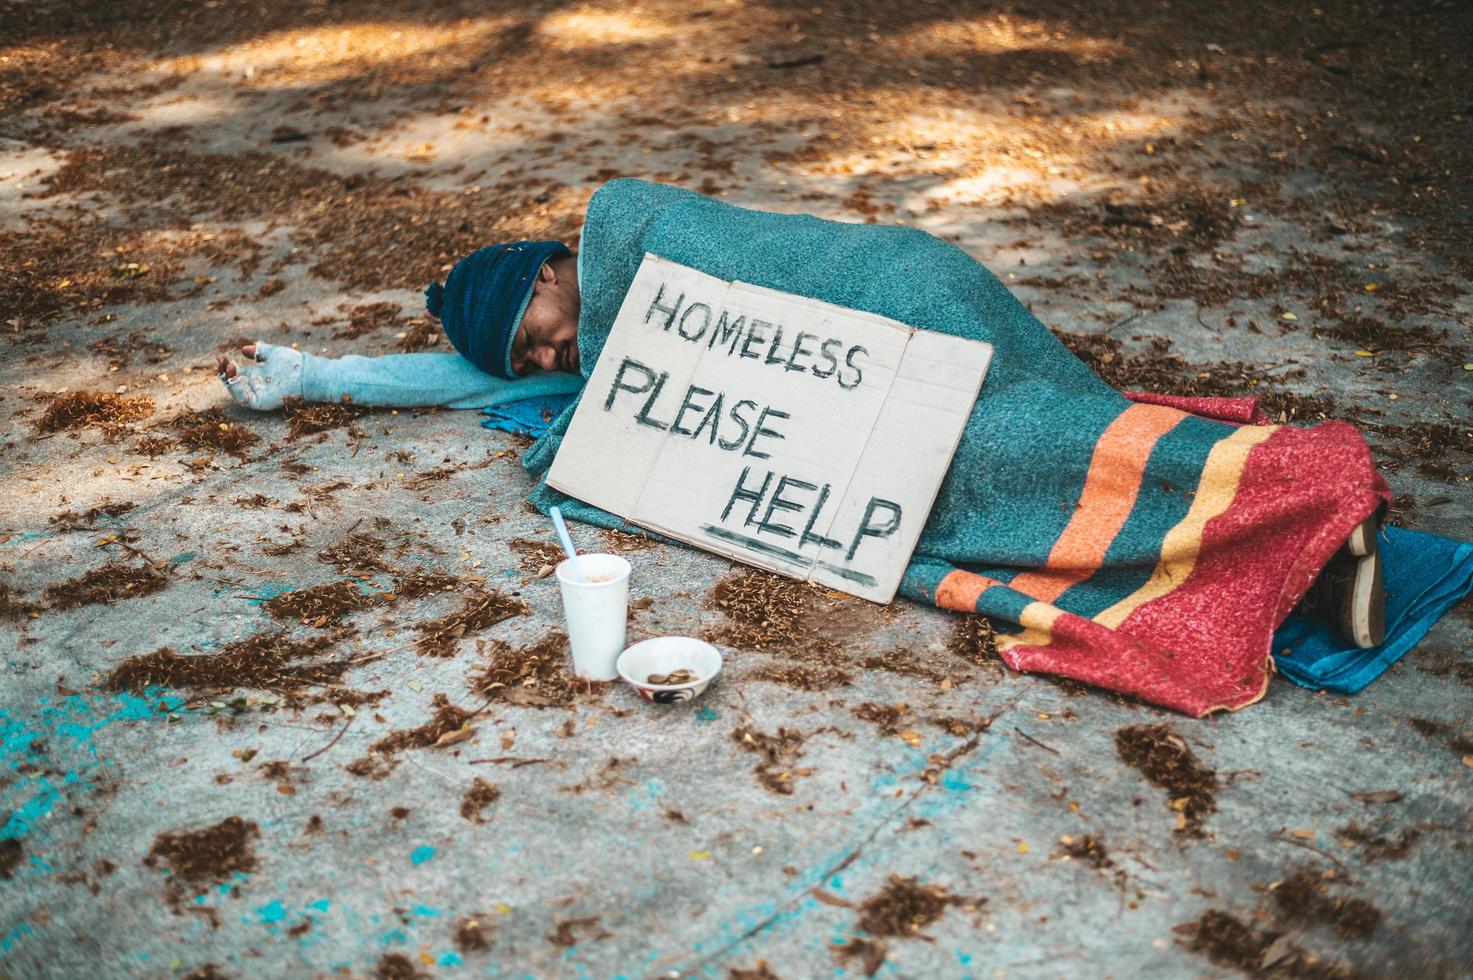 Beggar sleeps on the street with homeless messages please help photo